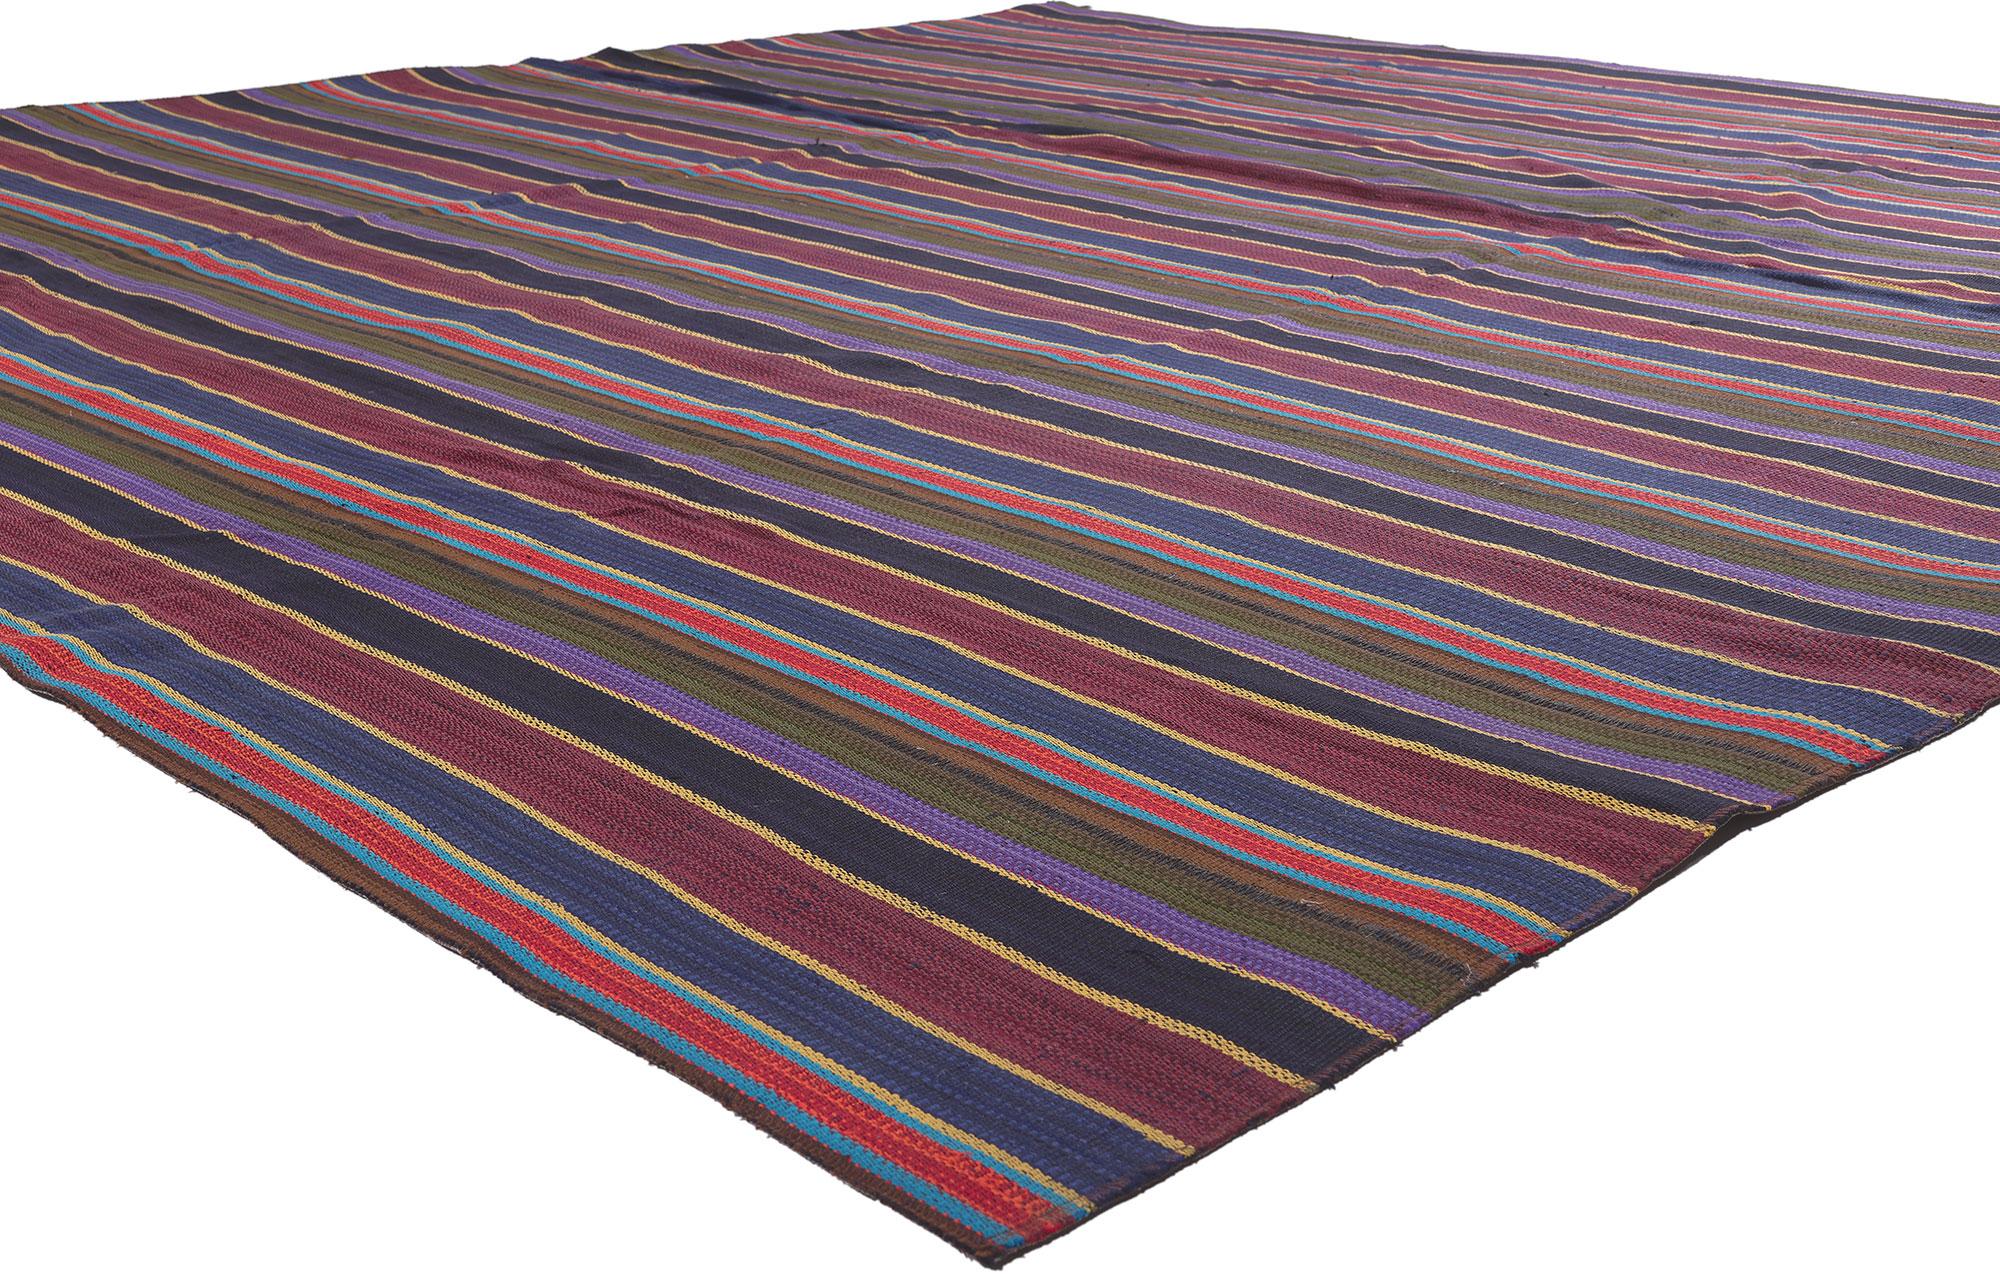 60803 Vintage Turkish Striped Kilim Rug,10'05 x 10'10. Infusing a touch of Ivy League sophistication into contemporary allure, this handwoven wool vintage Turkish striped kilim rug seamlessly harmonizes modern style with rugged beauty. The